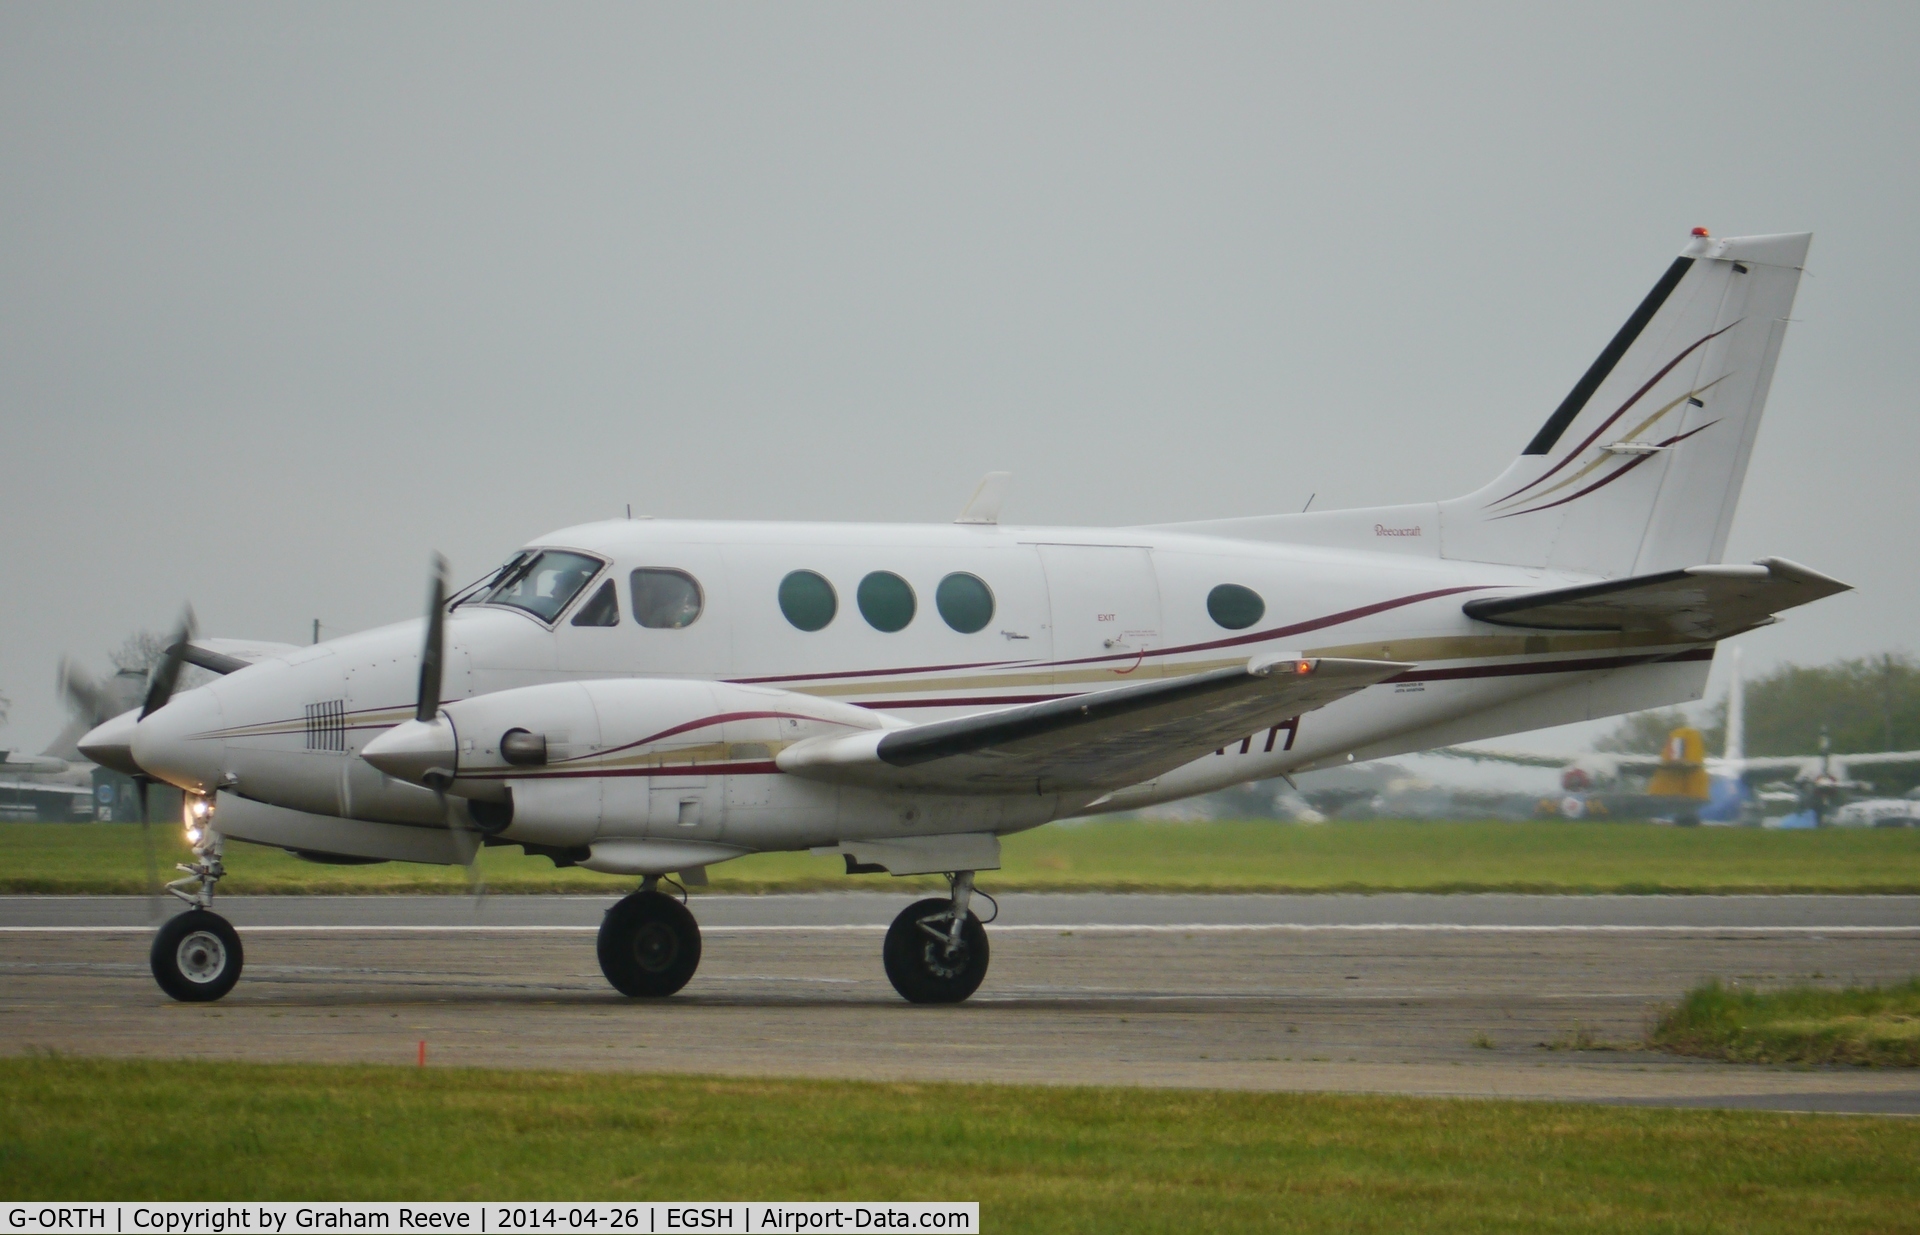 G-ORTH, 1975 Beech E90 King Air C/N LW-136, About to depart.